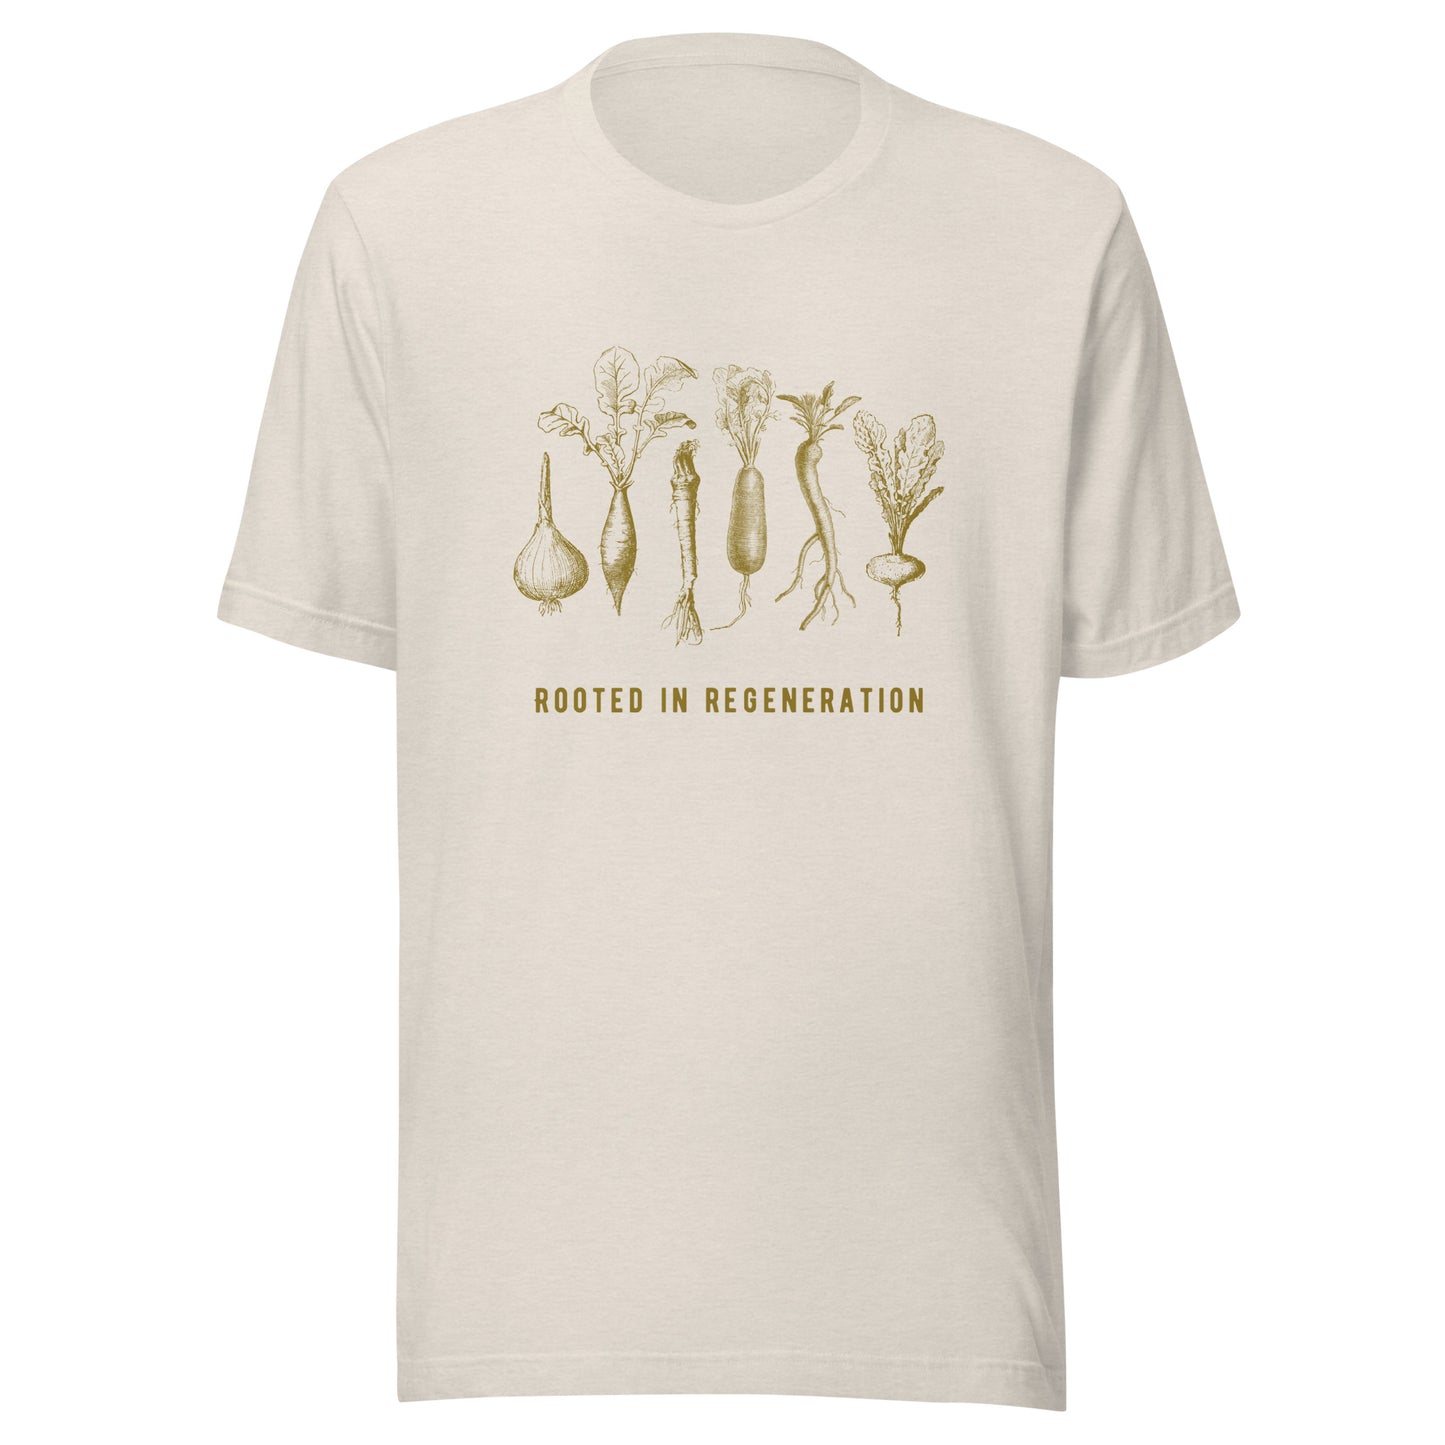 Rooted in Regeneration - Vegetable T-Shirt